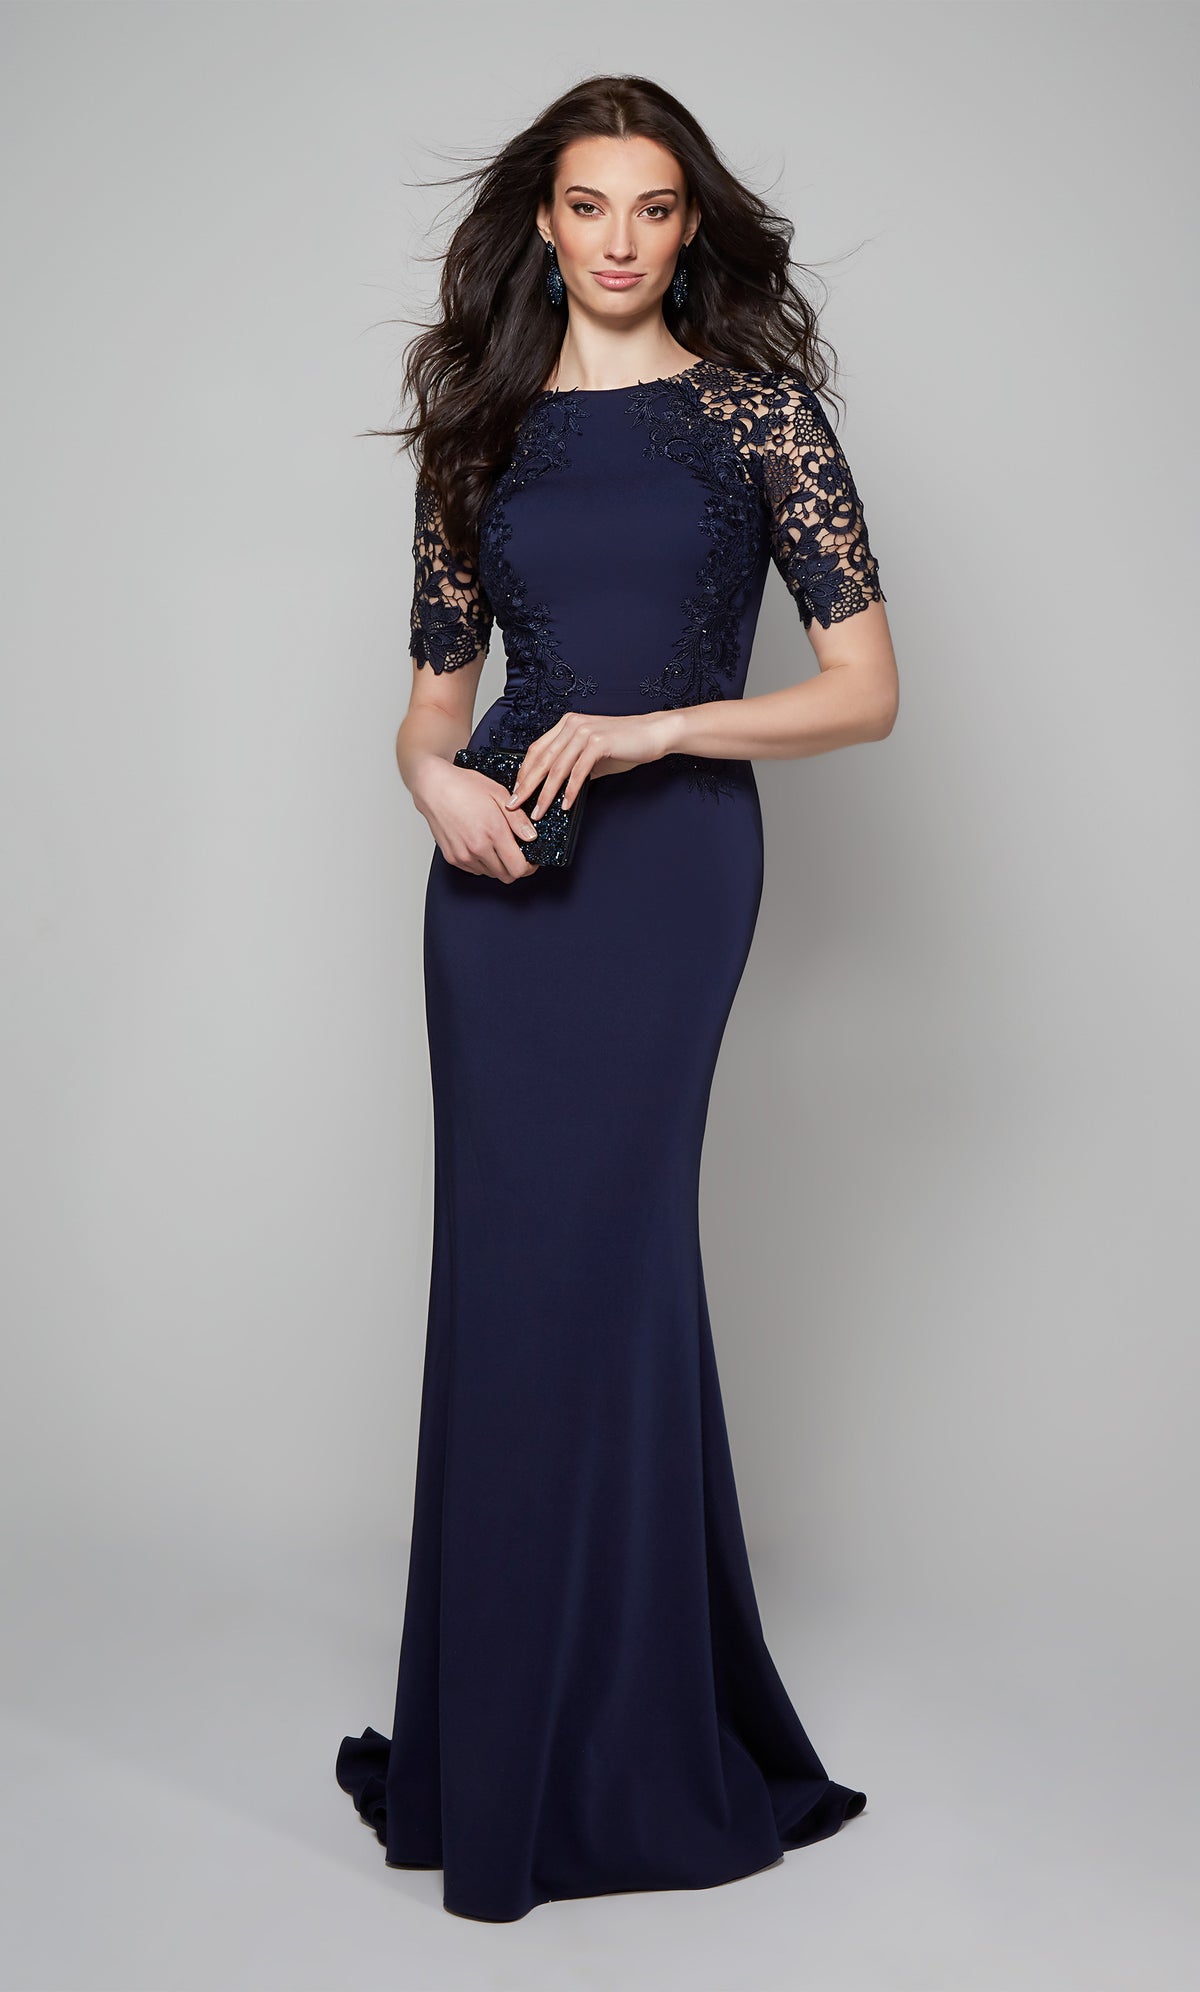 Elegant formal dress with a fit and flare silhouette, short sleeves, and lace detail.